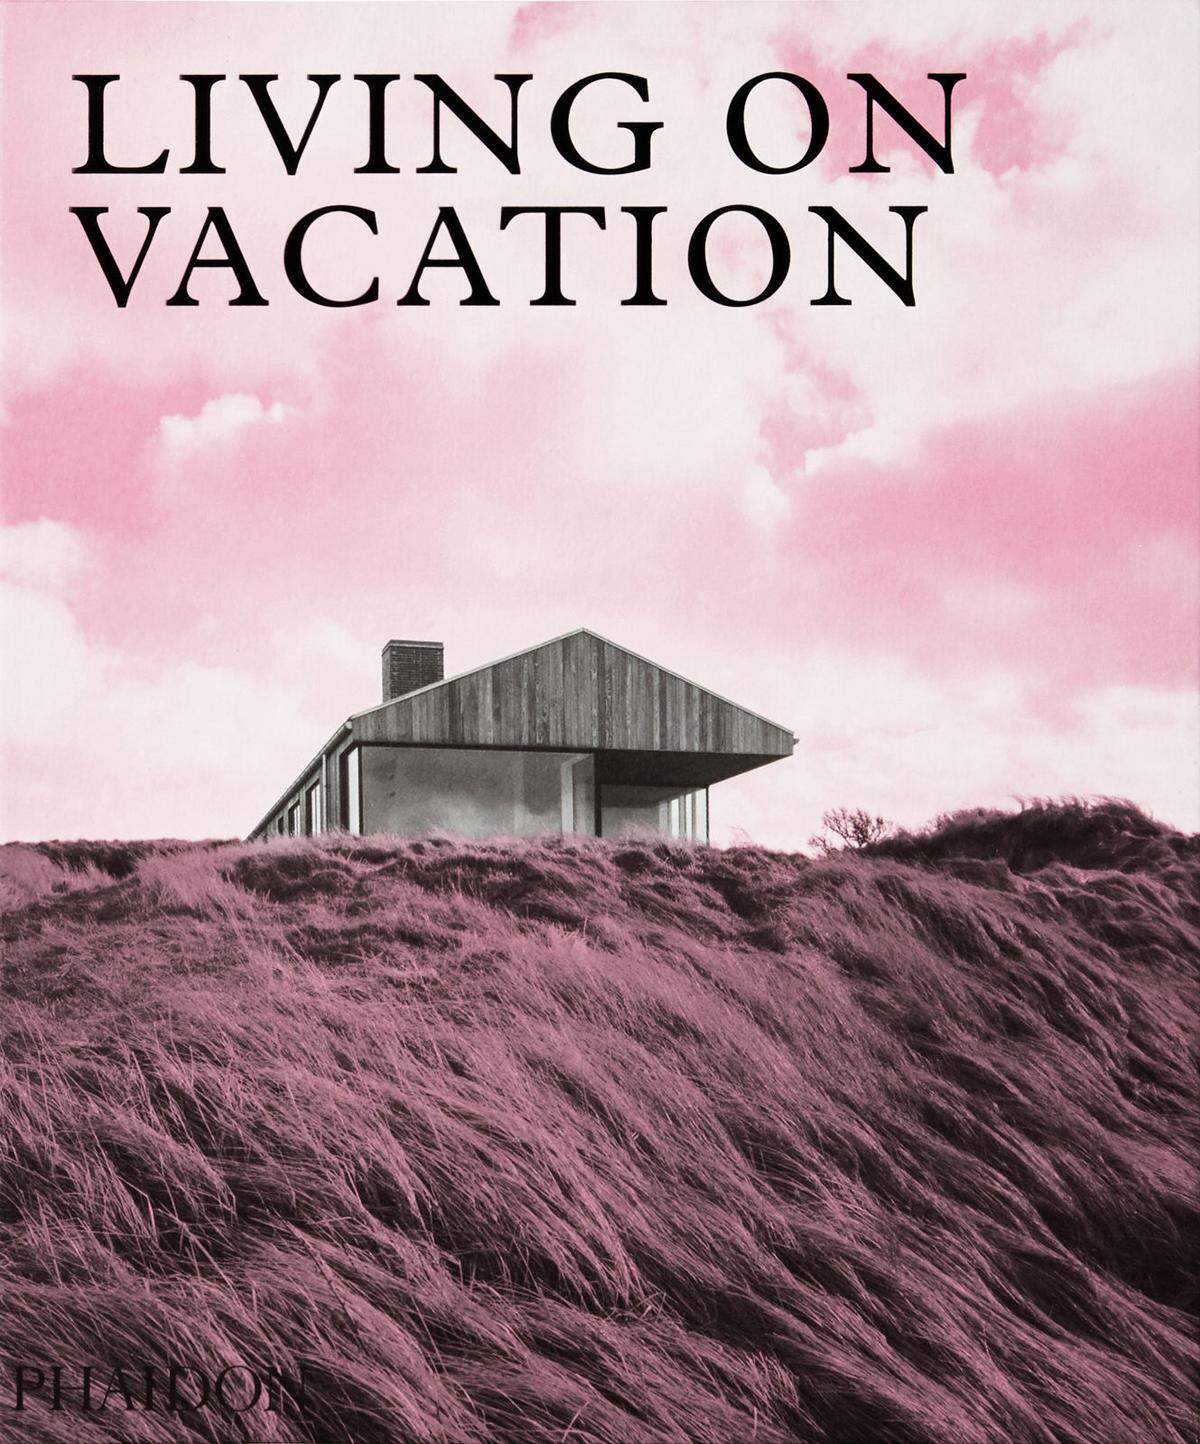 Living on Vacation, Contemporary Houses for Tranquil Living, erschienen im Phaidon Verlag, 39,95 Euro.